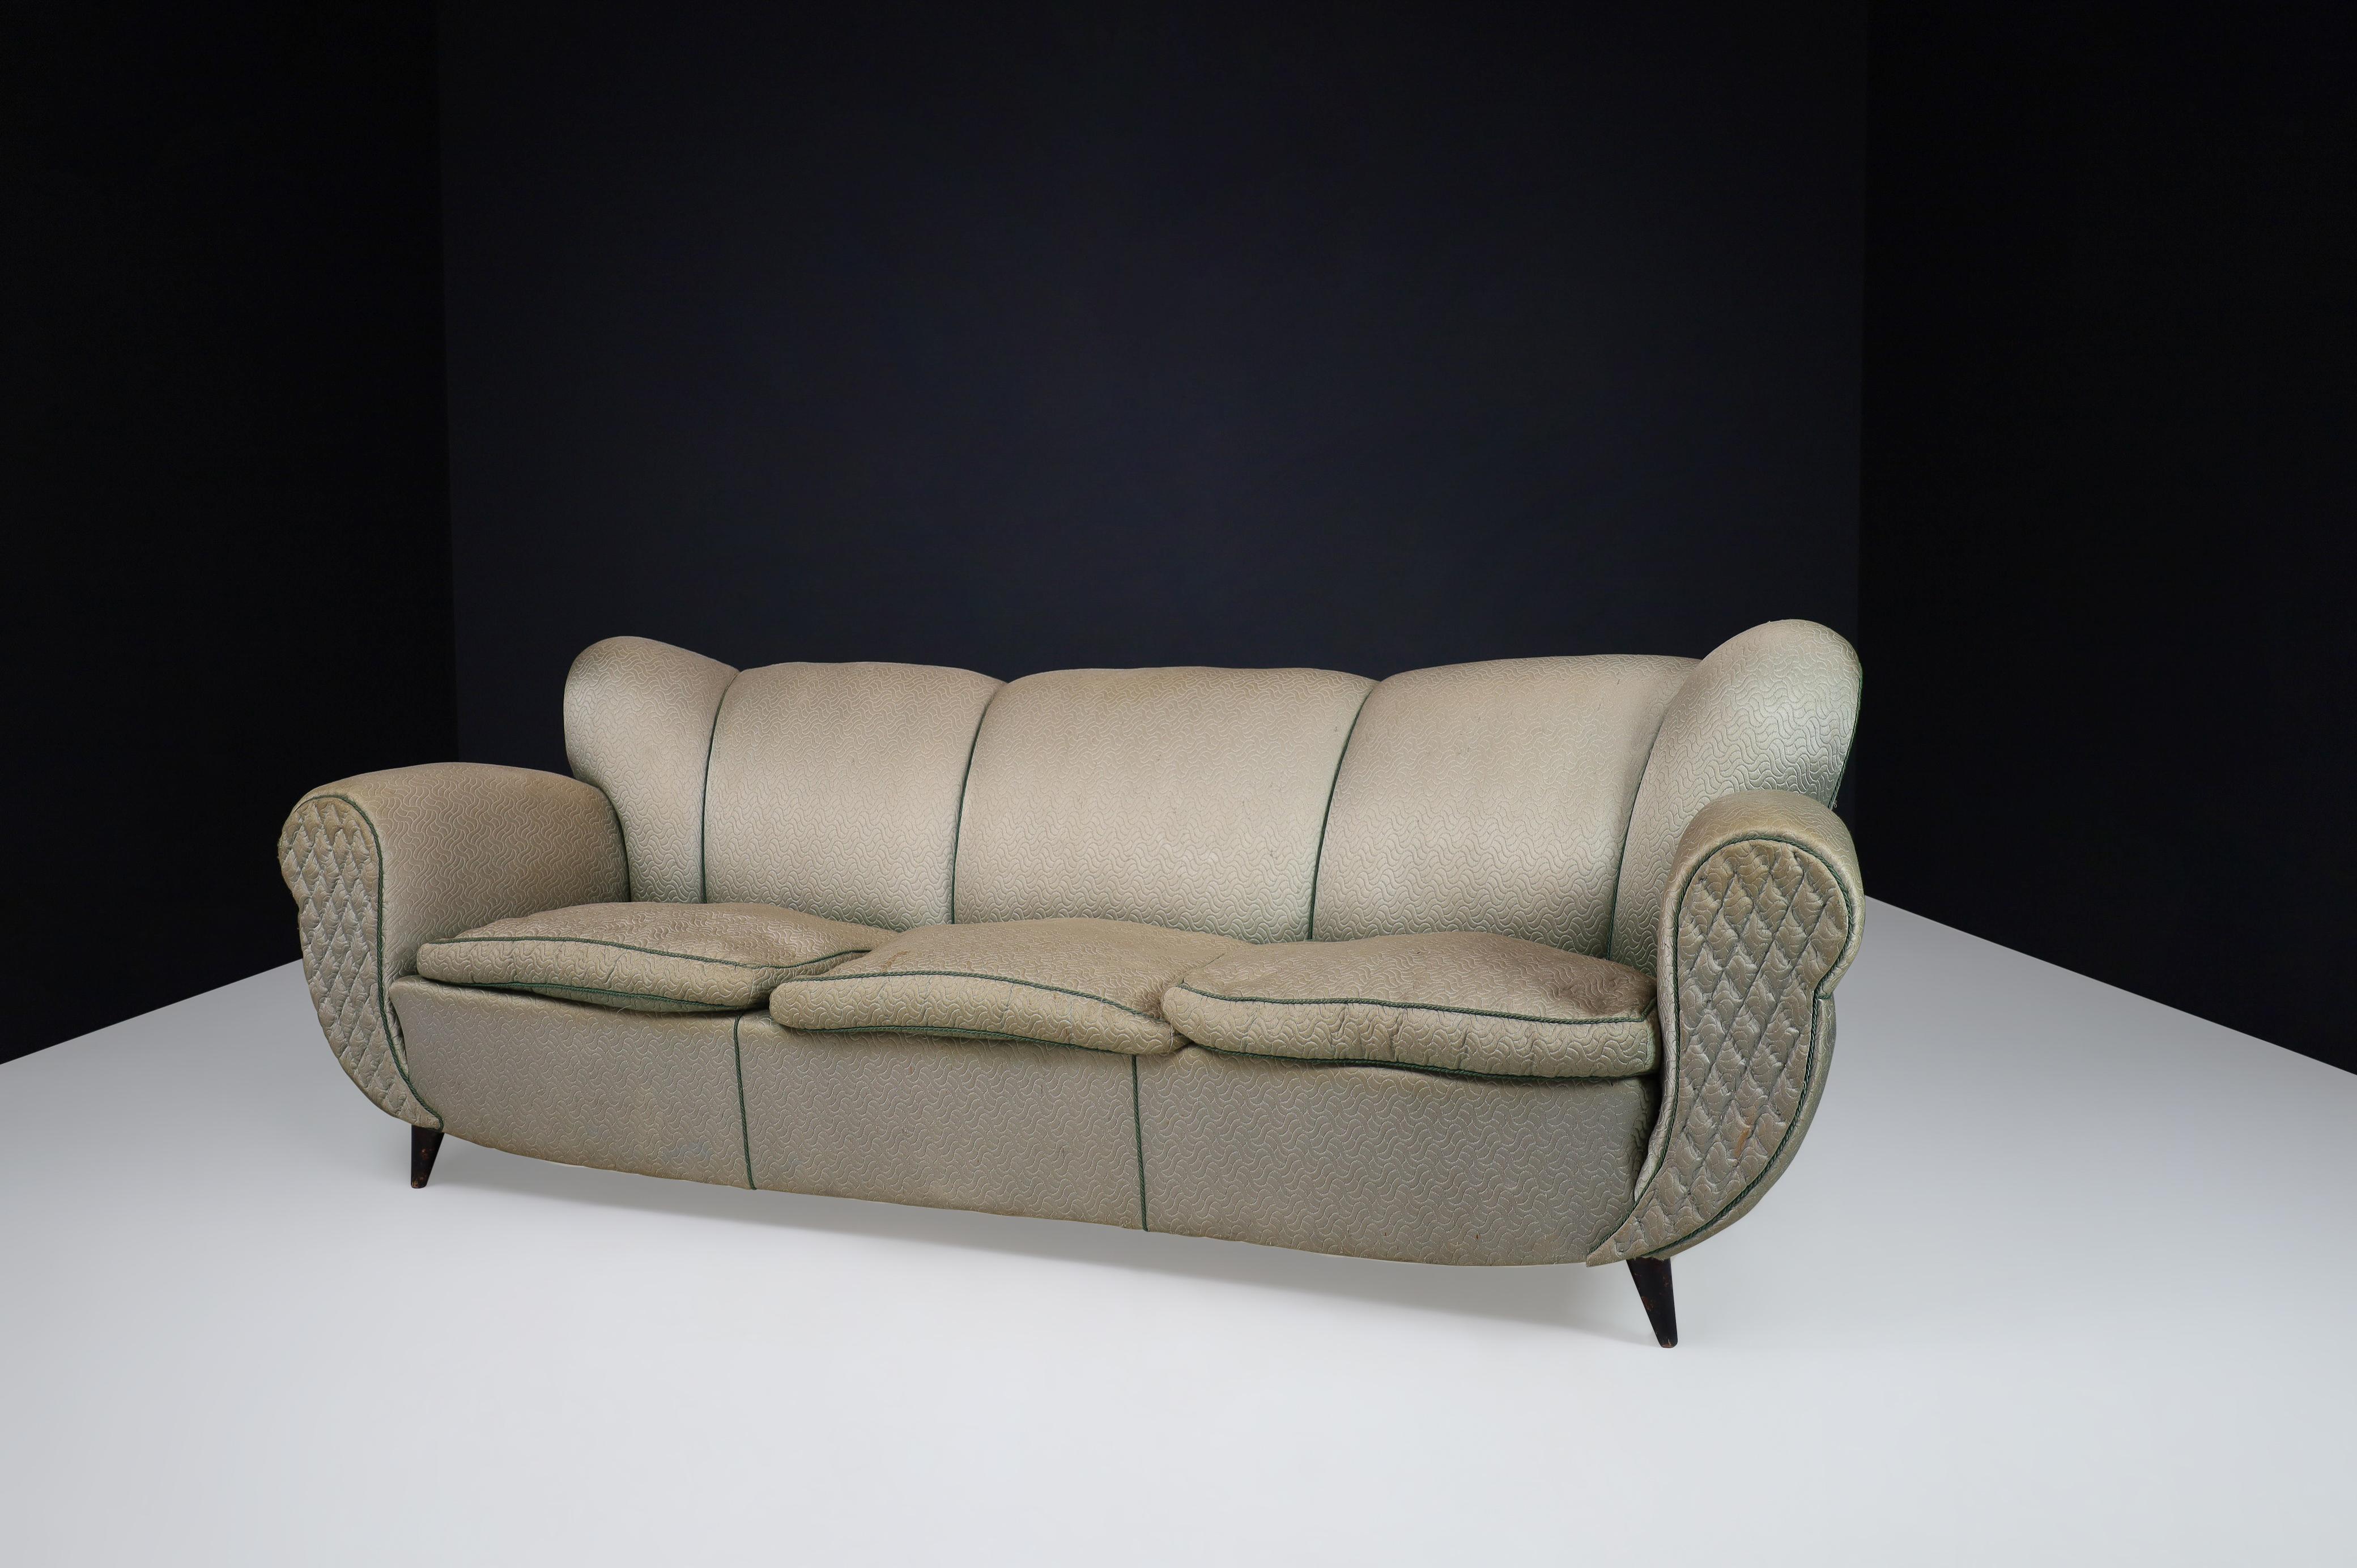 Guglielmo Ulrich Art Deco sofa in original fabric, Italy 1930s 

A particular three-seater sofa was designed by the famous architect Guglielmo Ulrich. Production of the 1930s in Art Deco style. Thanks to its elegant armrests and seating, the sofa